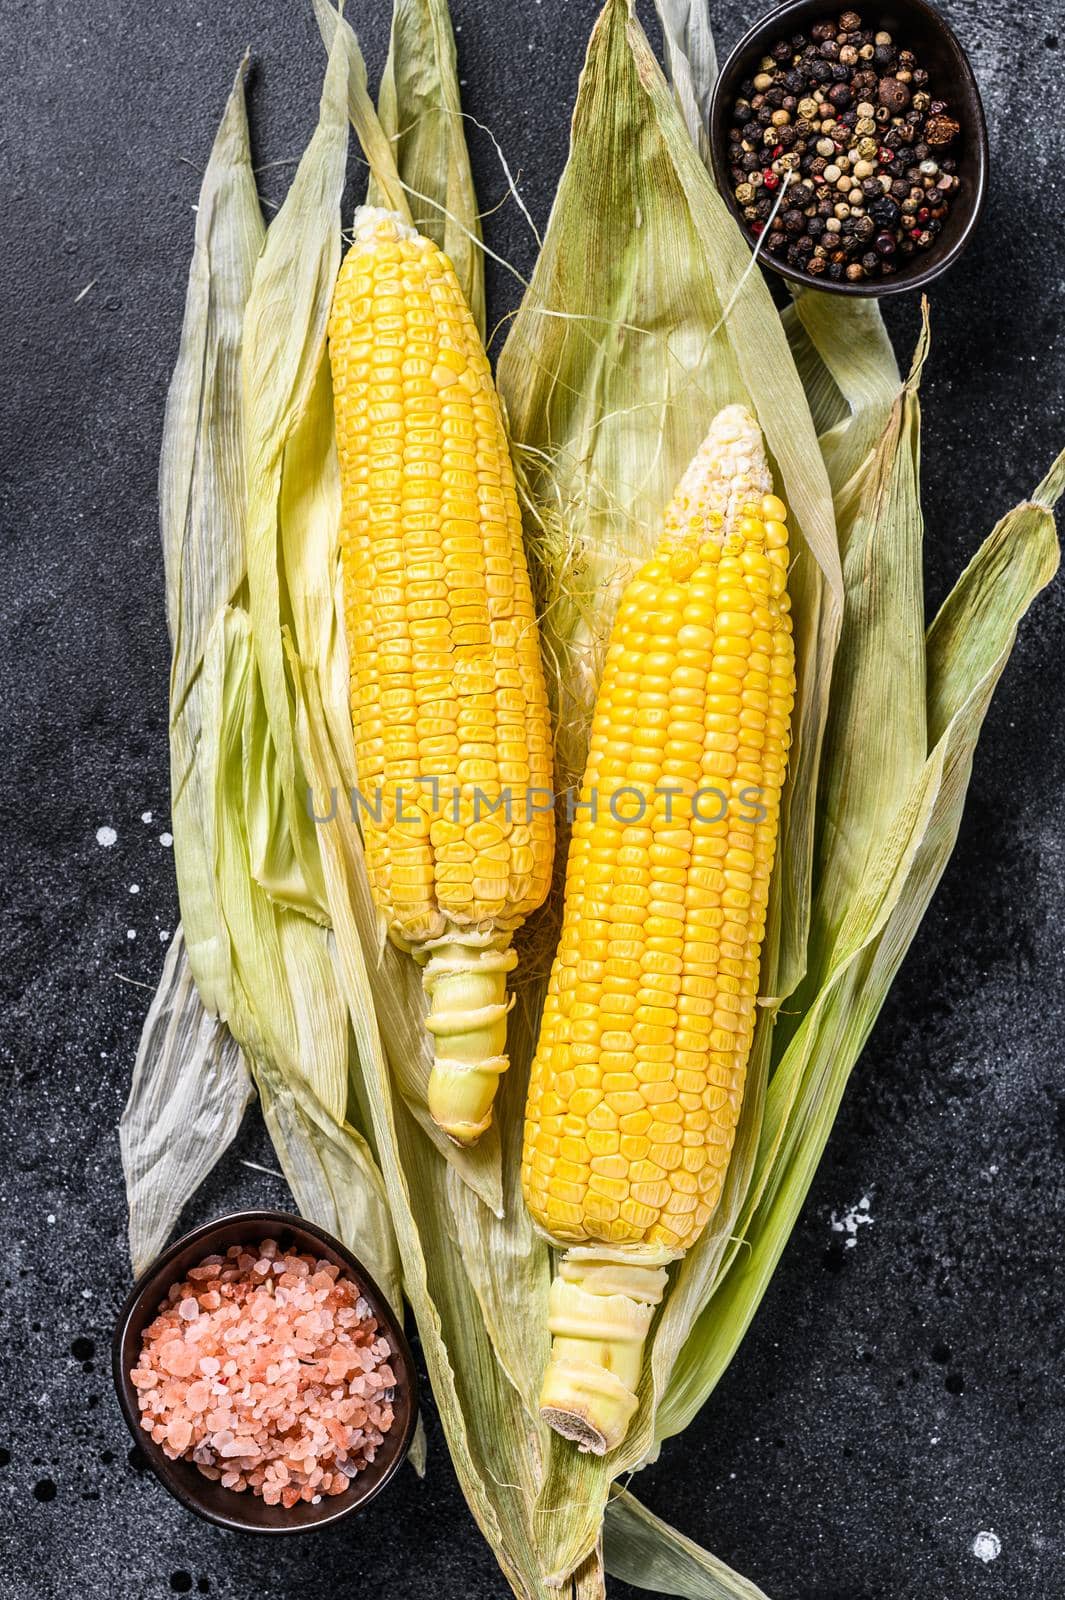 Cooked corn on cobs with salt and pepper. Black background. Top view.